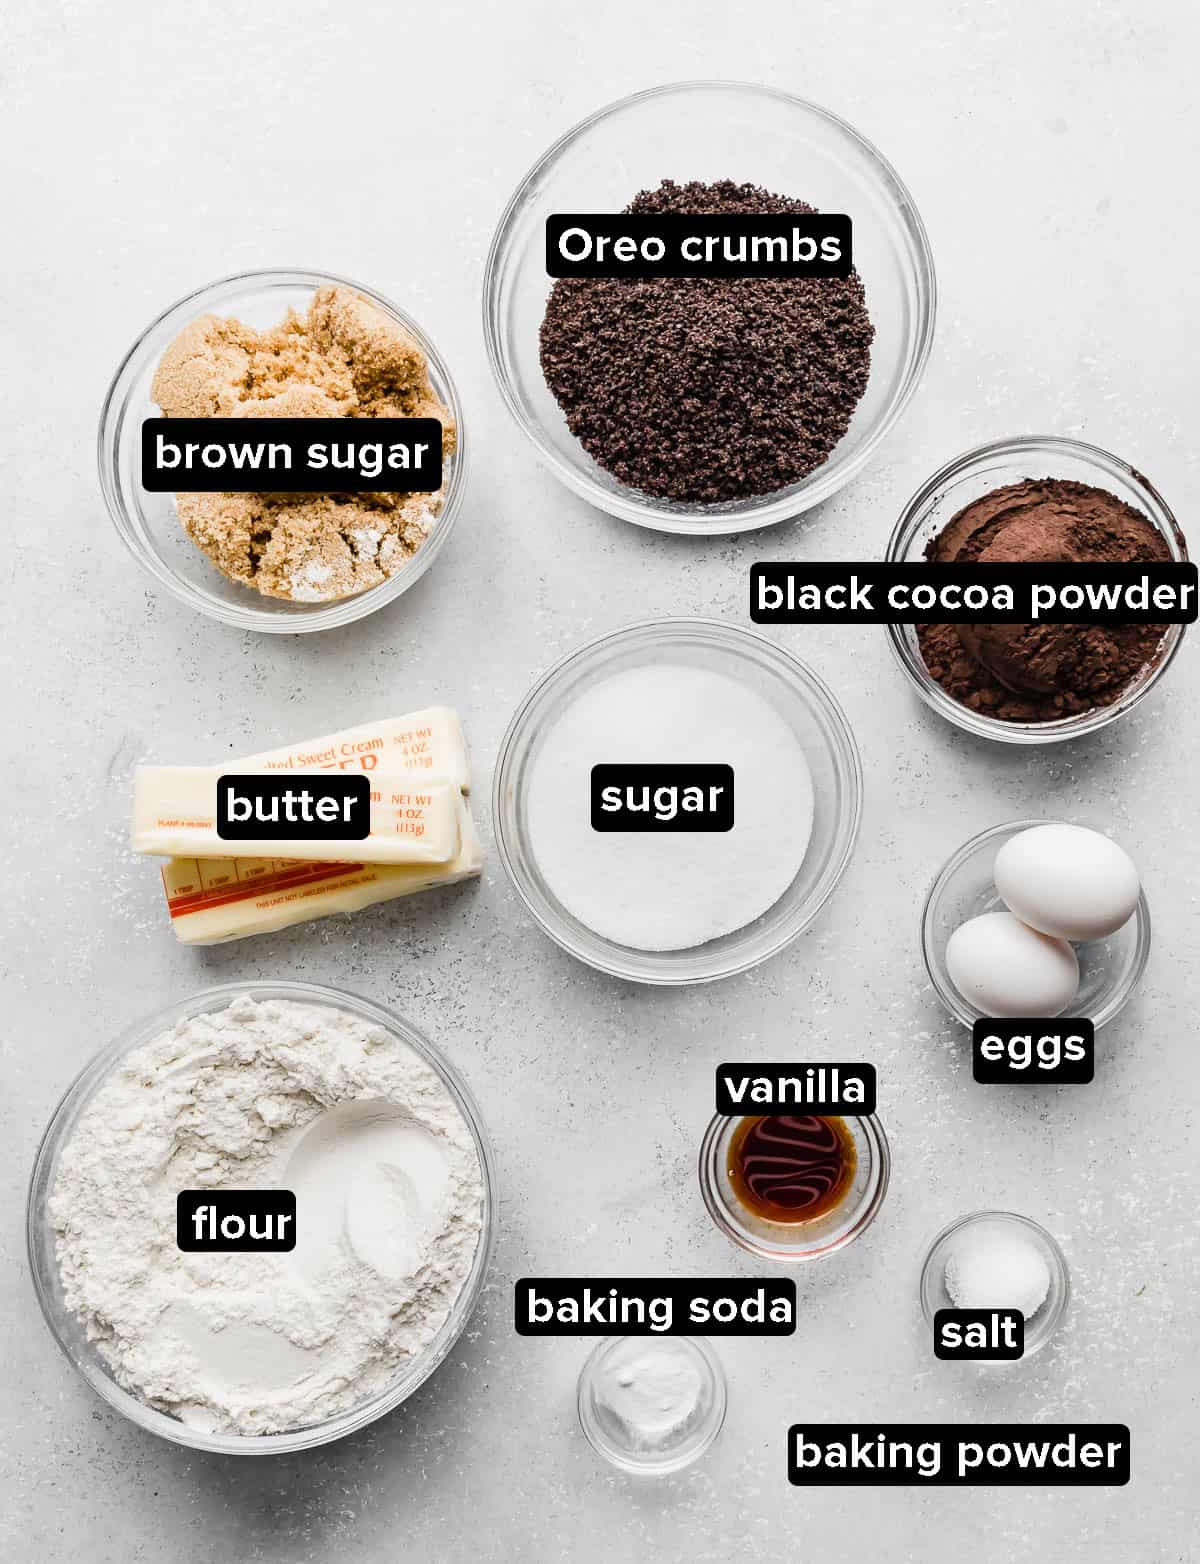 Homemade Oreo Cookie ingredients in glass bowls on a white background.